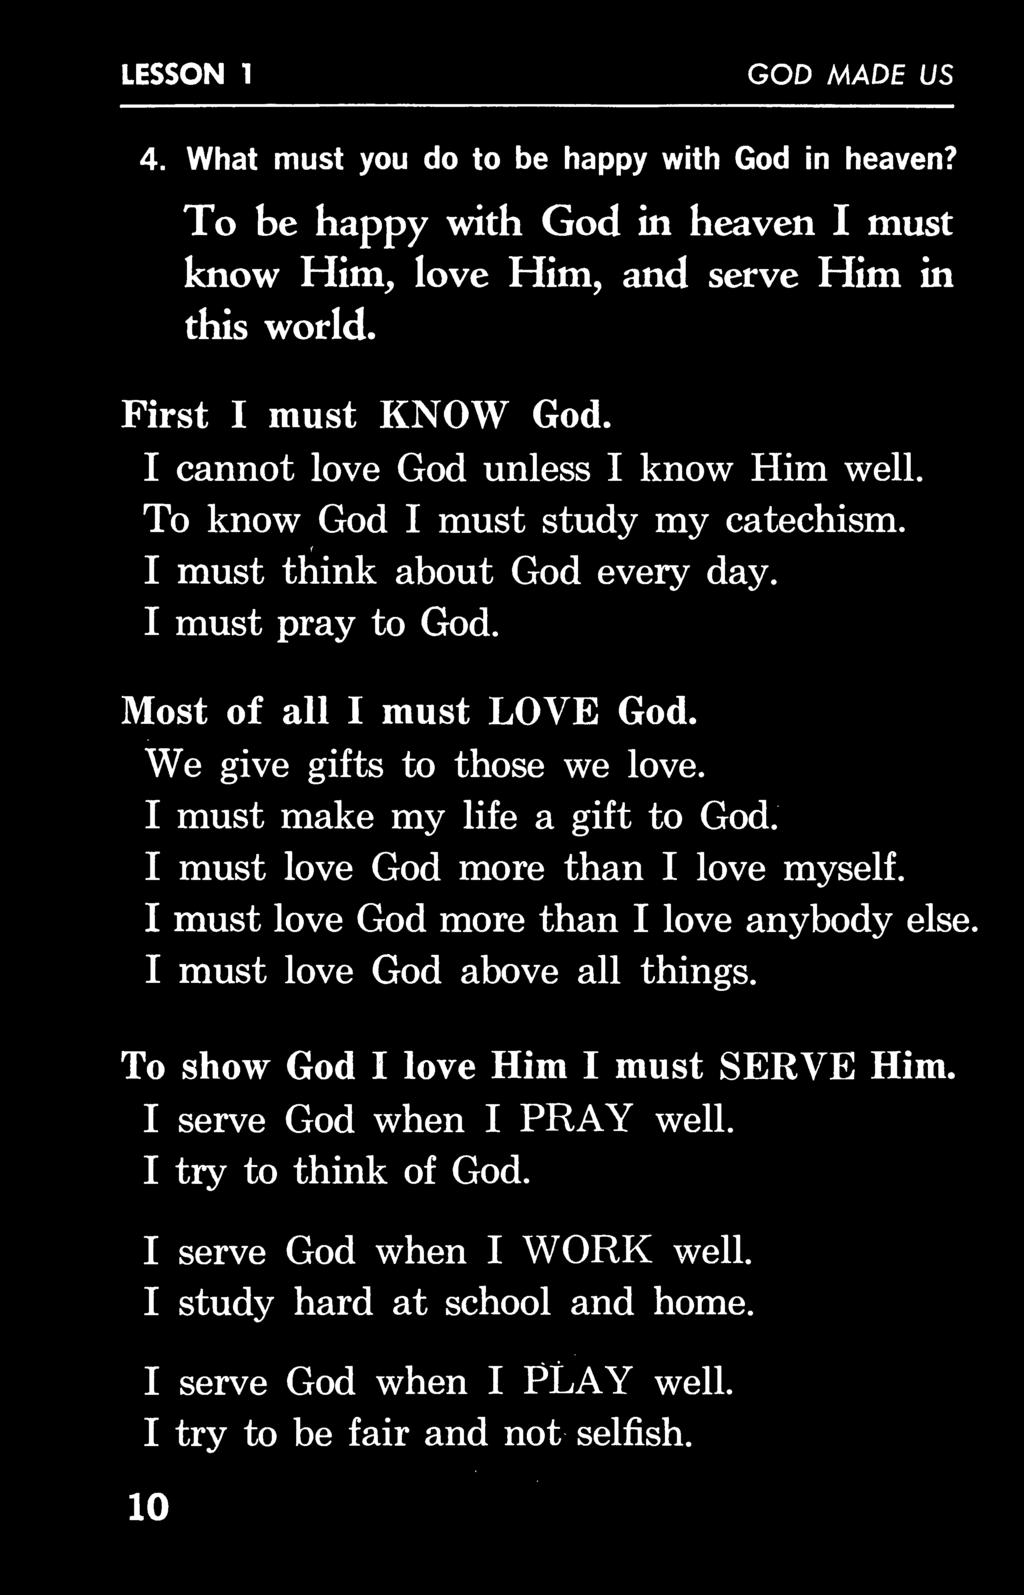 We give gifts to those we love. I must make my life a gift to God. I must love God more than I love myself. I must love God more than I love anybody else. I must love God above all things.